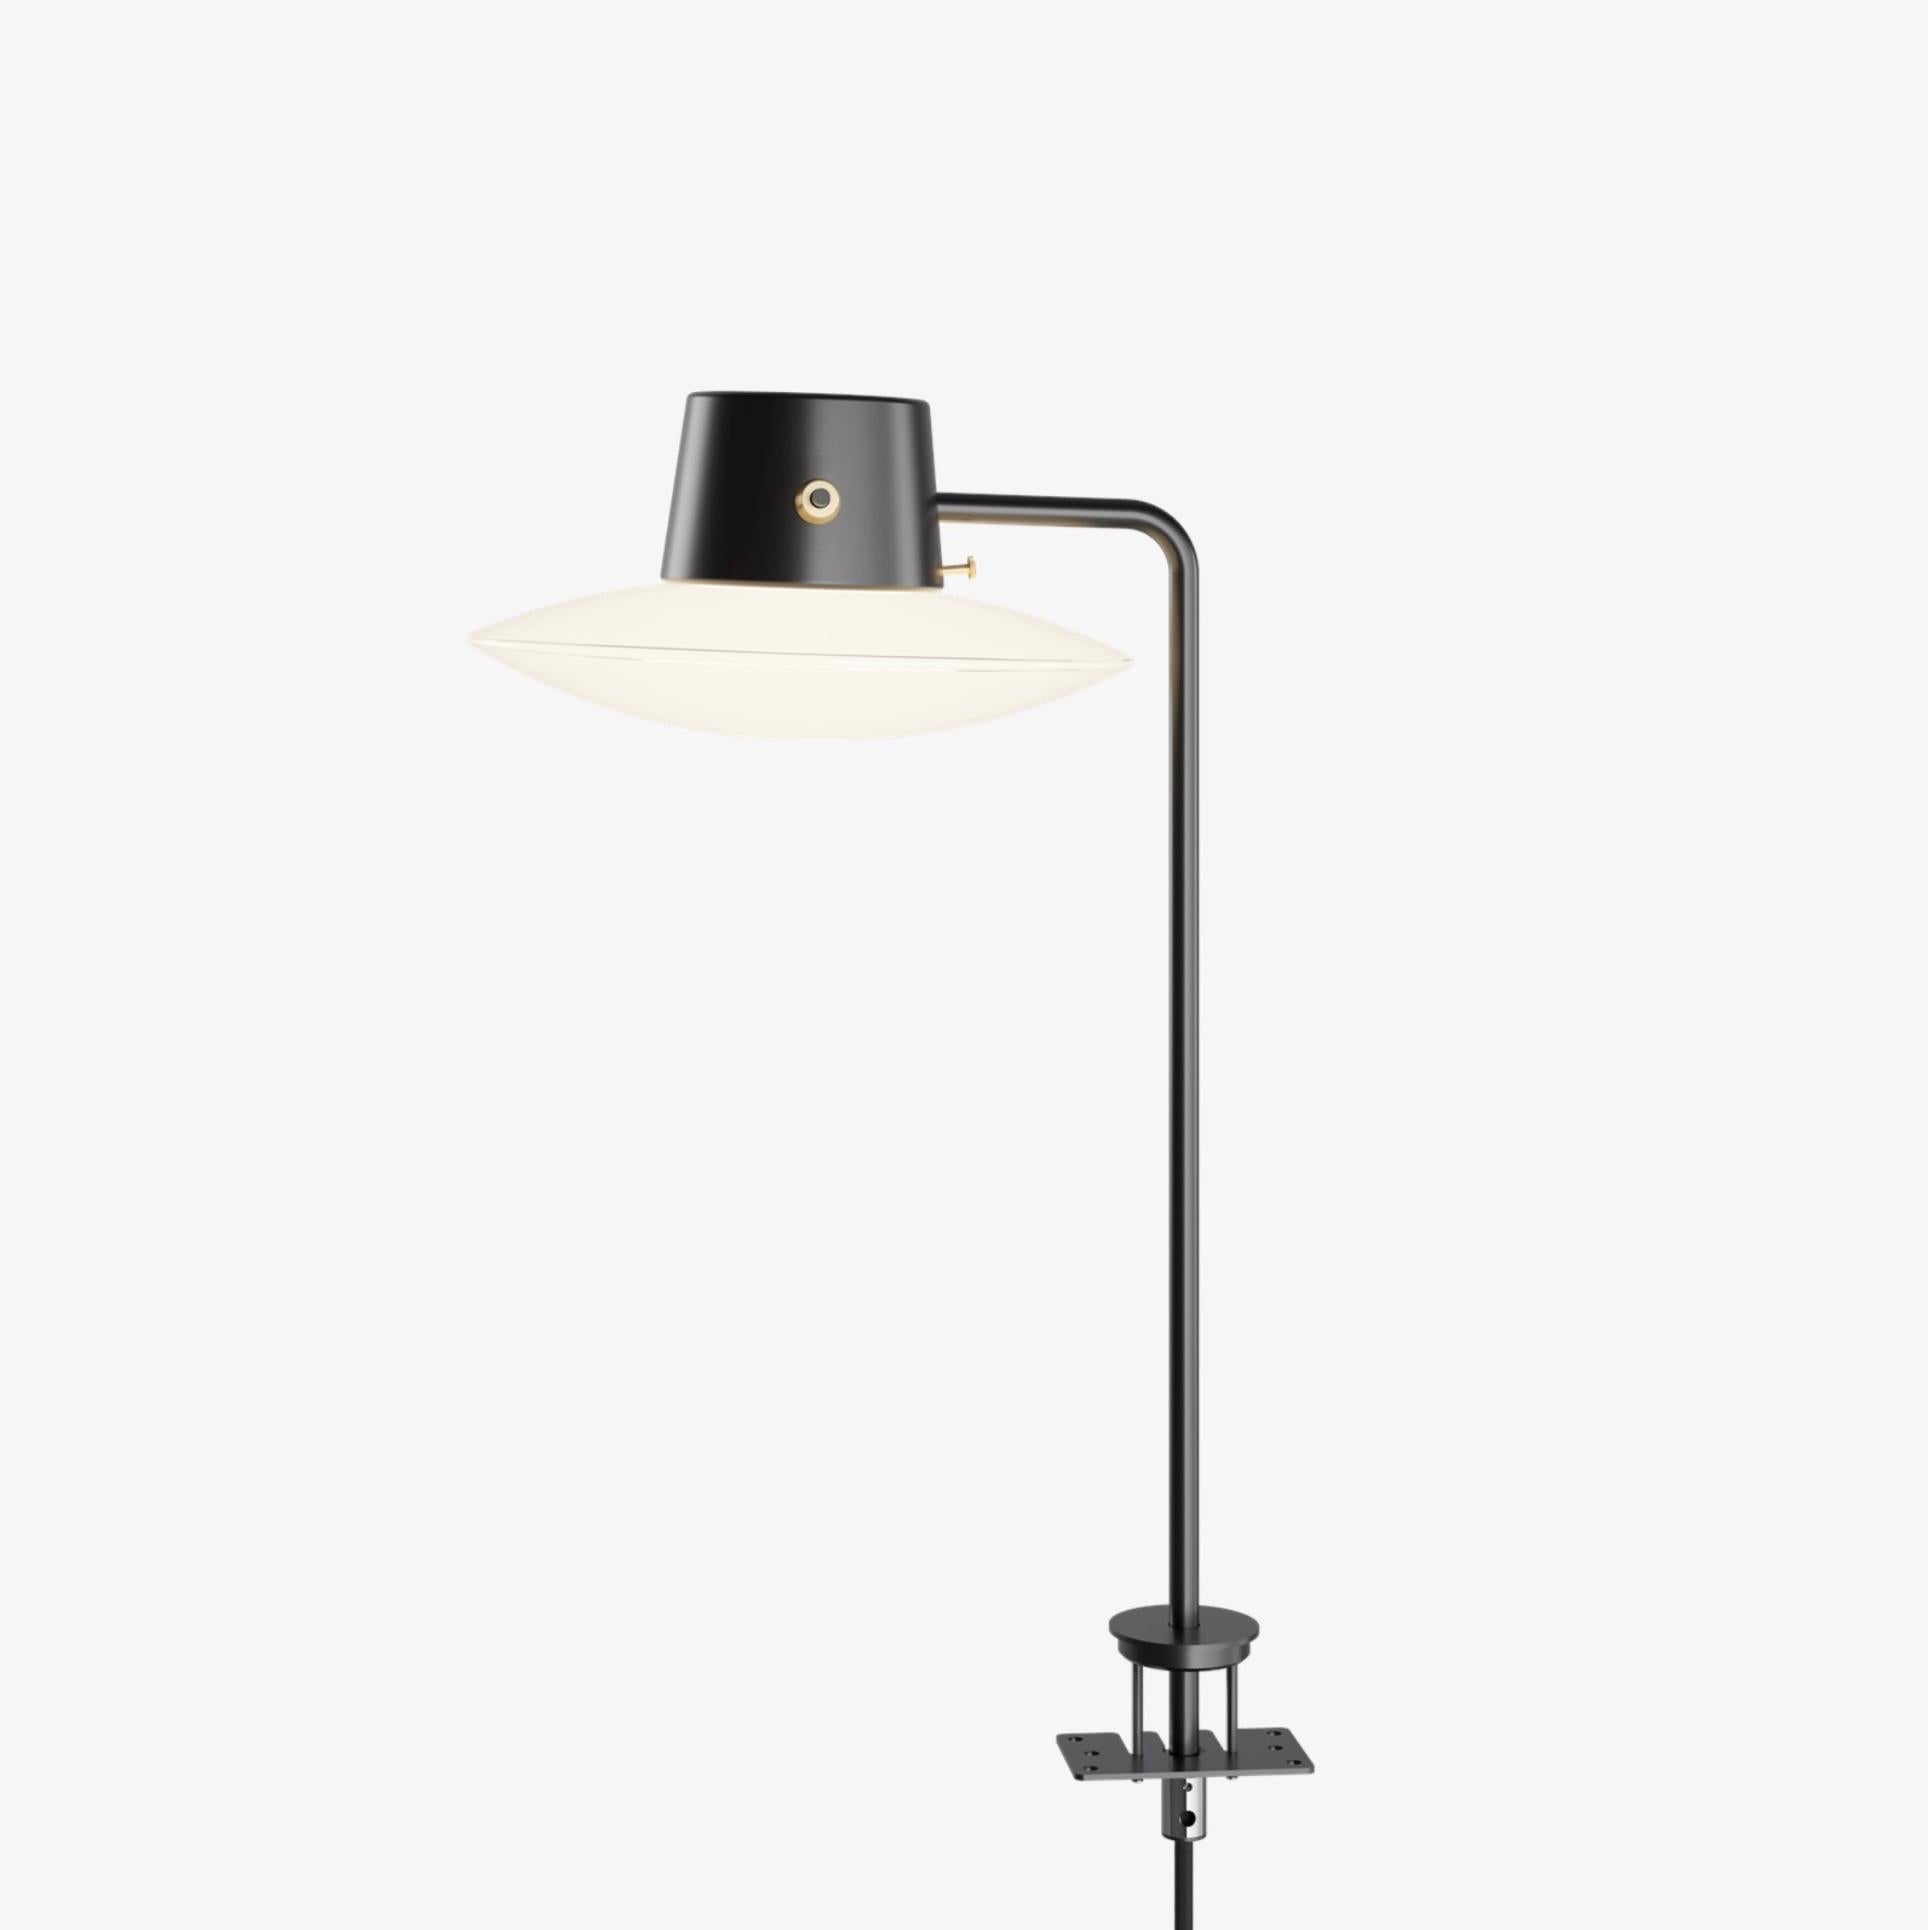 Arne Jacobsen AJ Oxford Table Lamp with Metal Shade for Louis Poulsen, 1963 For Sale 4